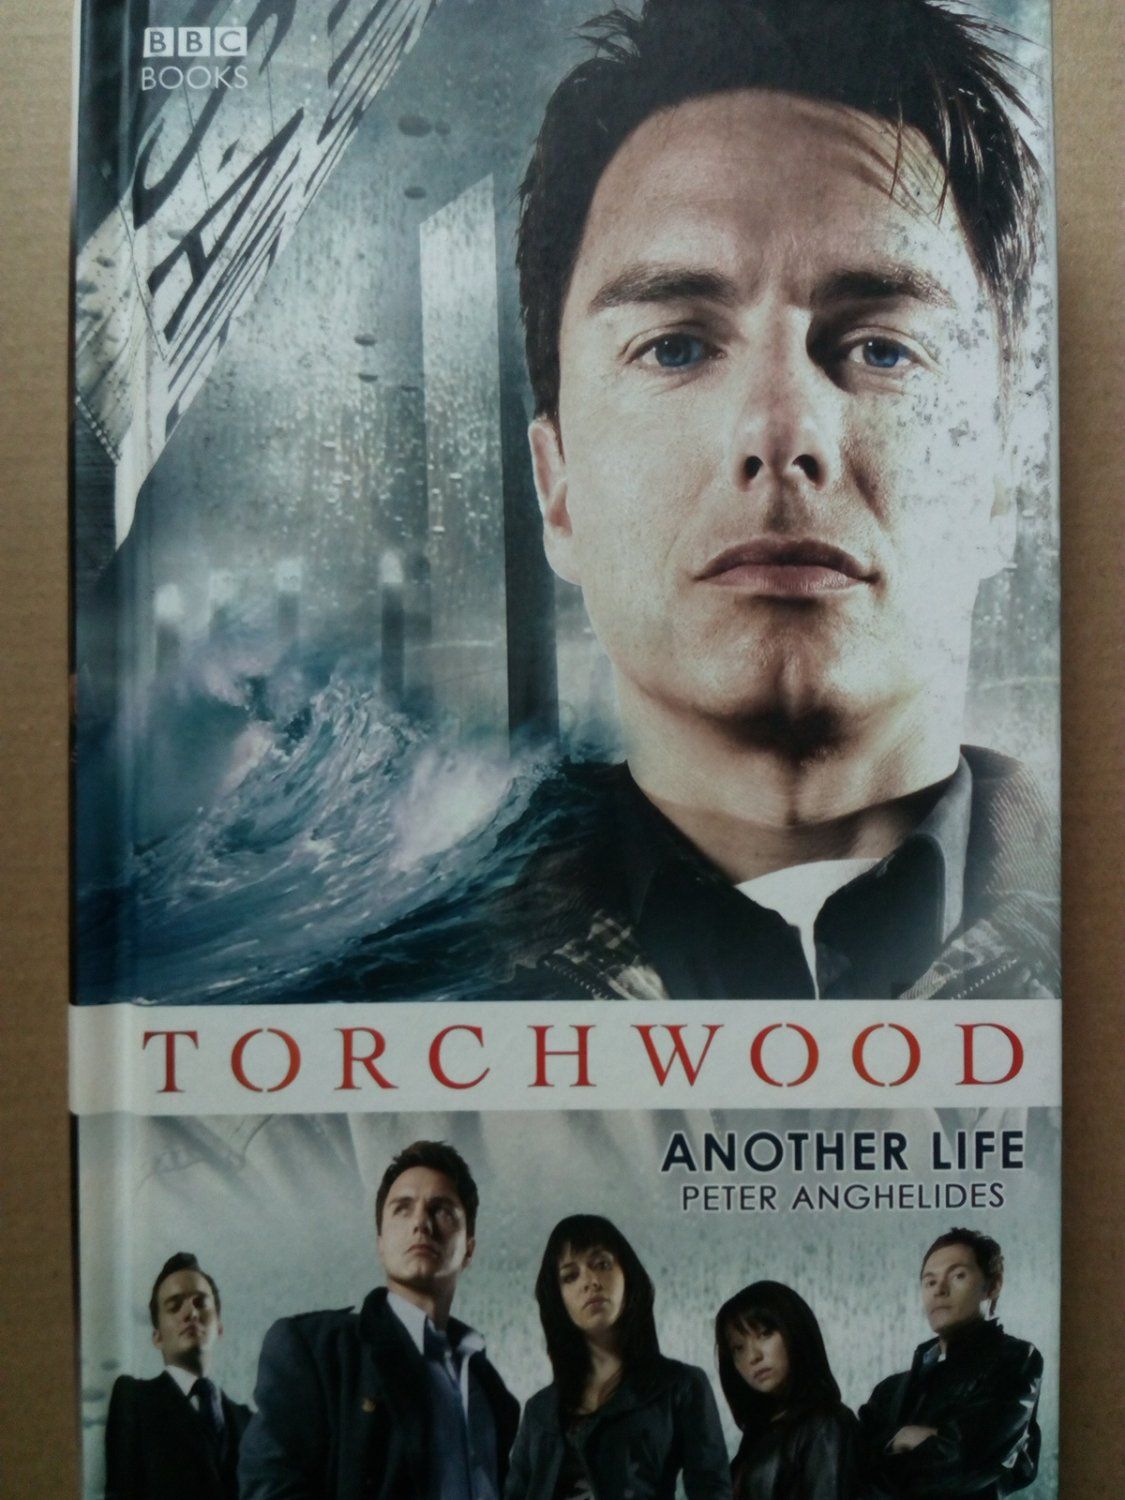 Torchwood: Another Life - Peter Anghelides